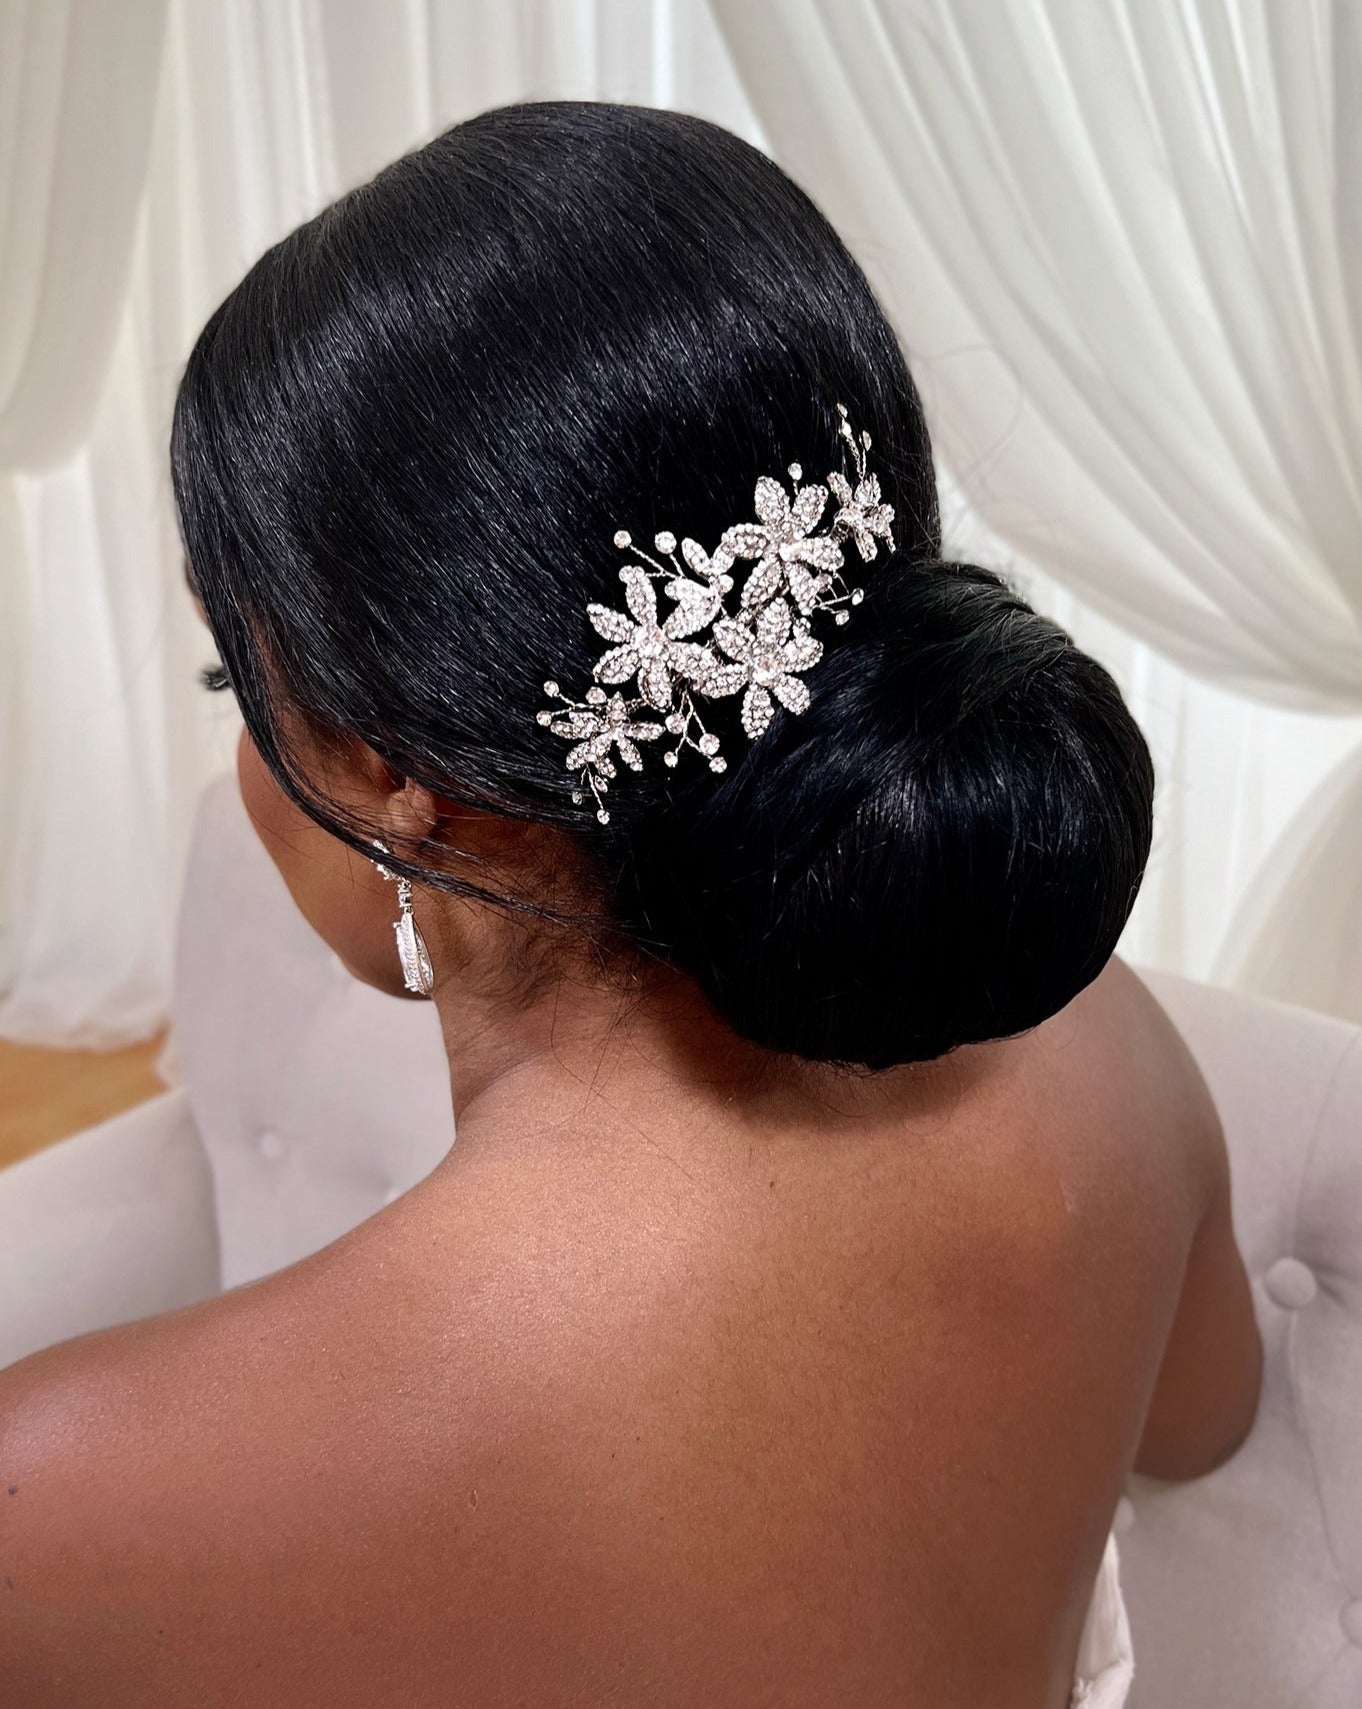 female model wearing silver bridal hair comb with crystalized flowers and small sprigs of crystal